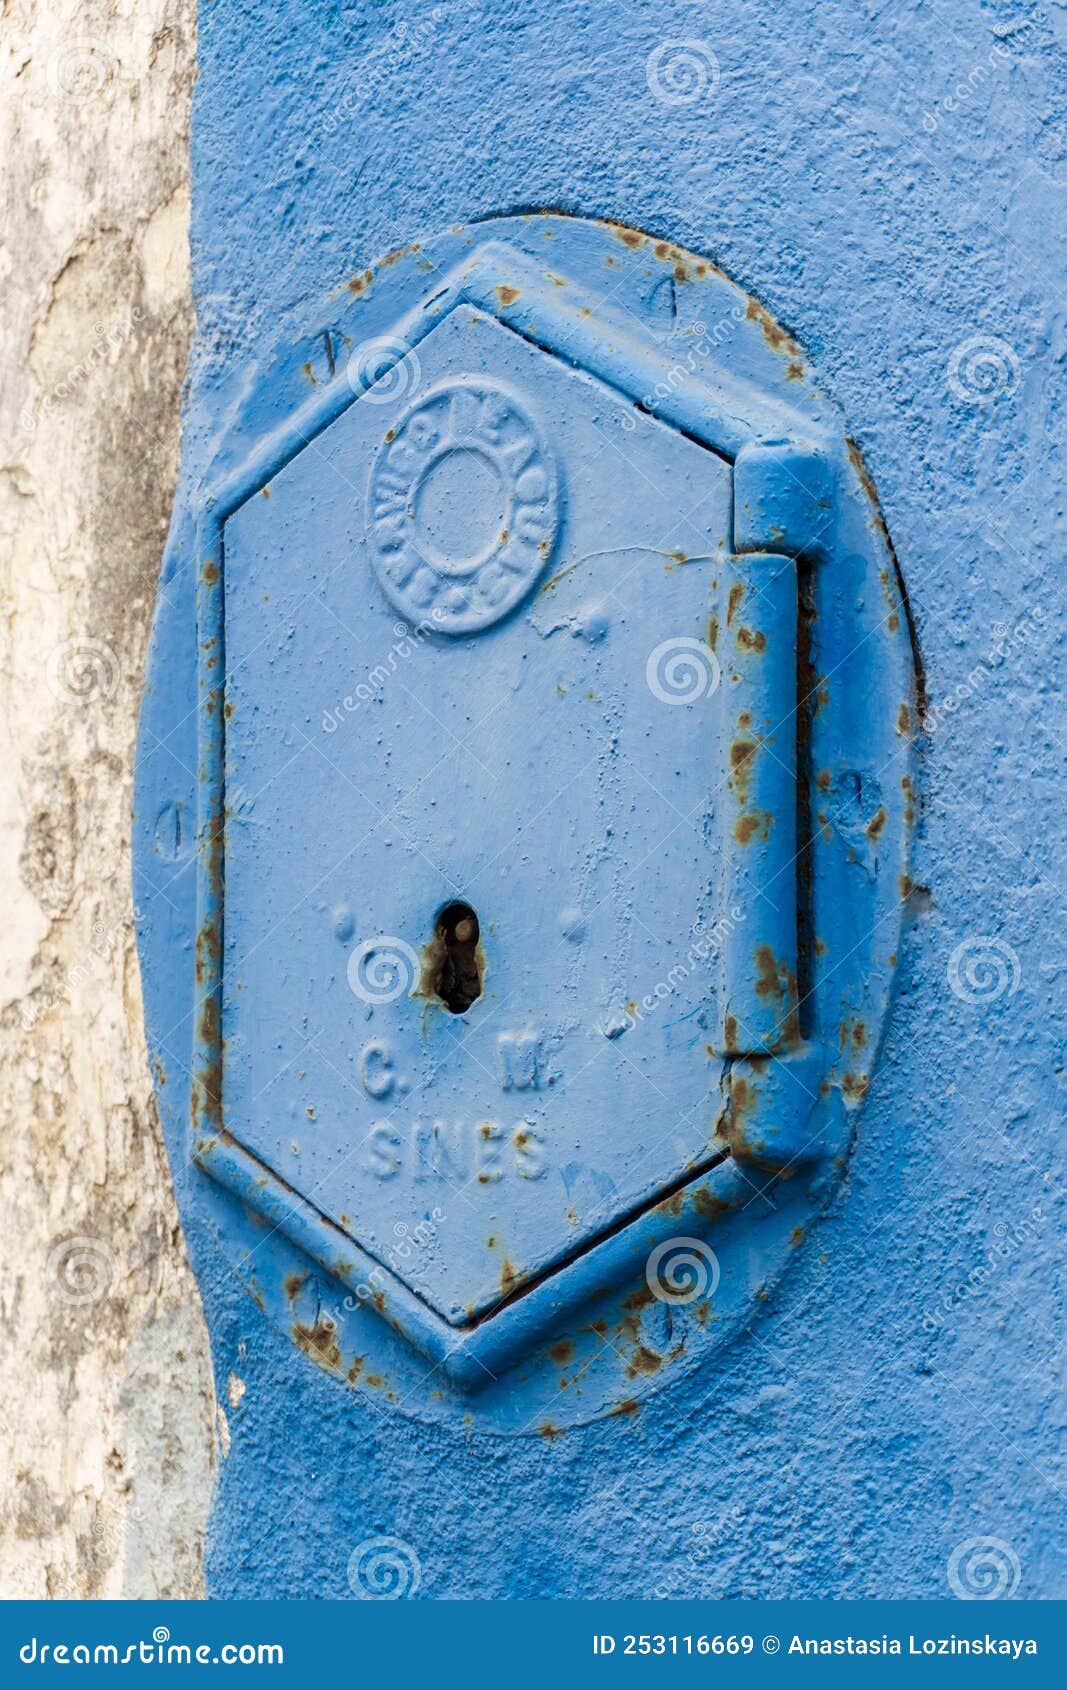 old rusty blue painted iron lid of a valve box of the servico de agua public water supply